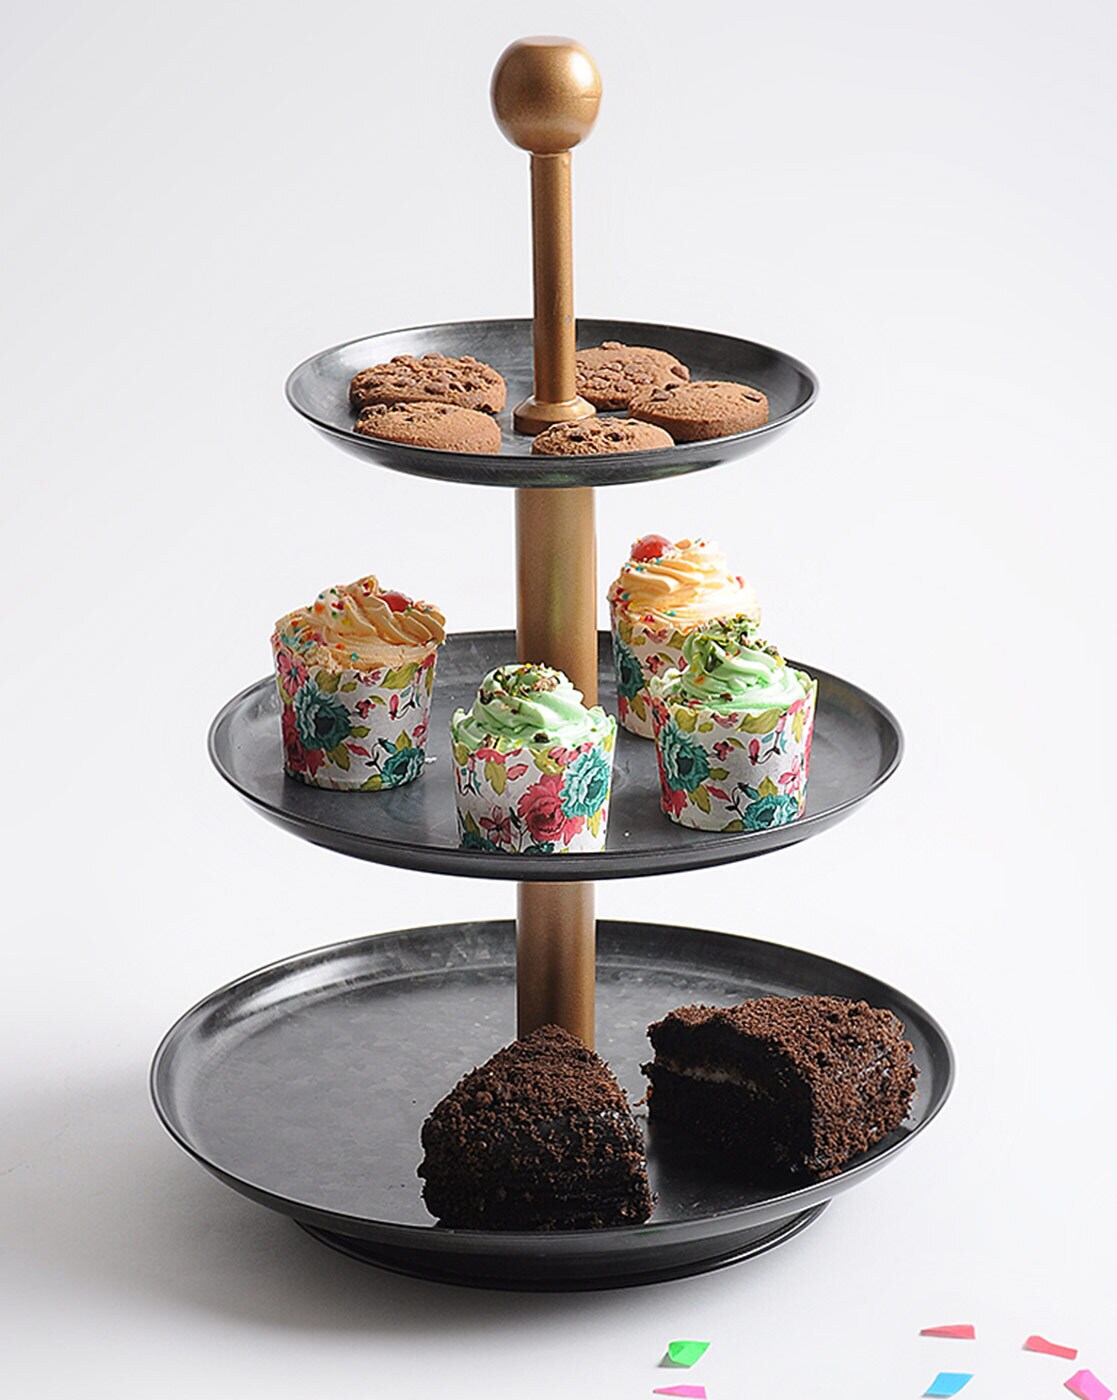 AimtoHome 1-Tier Black Cardboard Cake and Cupcake Holder Stand Dessert Tower Pastry Serving 